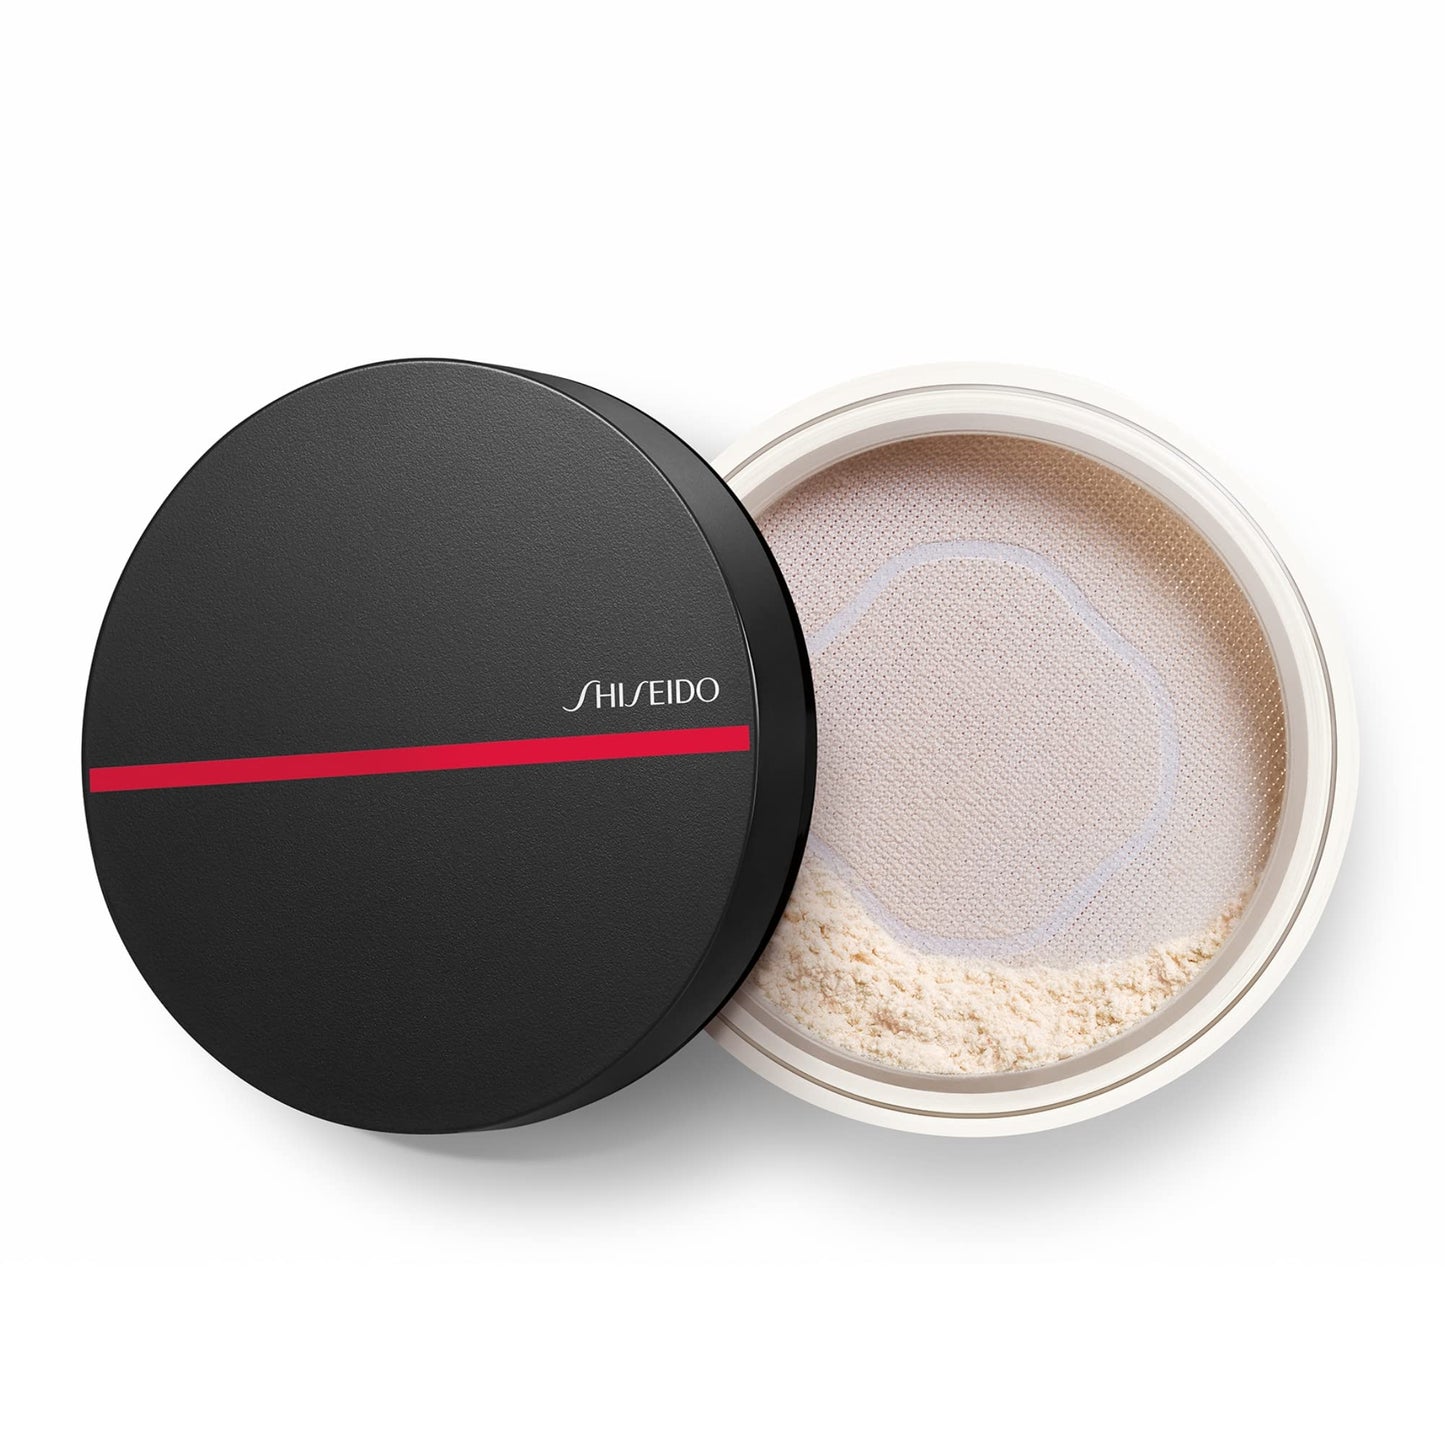 Shiseido Synchro Skin Invisible Silk Loose Powder, Radiant - Setting Powder for Smoother, More Polished Skin - 8-Hour Shine Control - Non-Comedogenic - All Skin Types & Tones